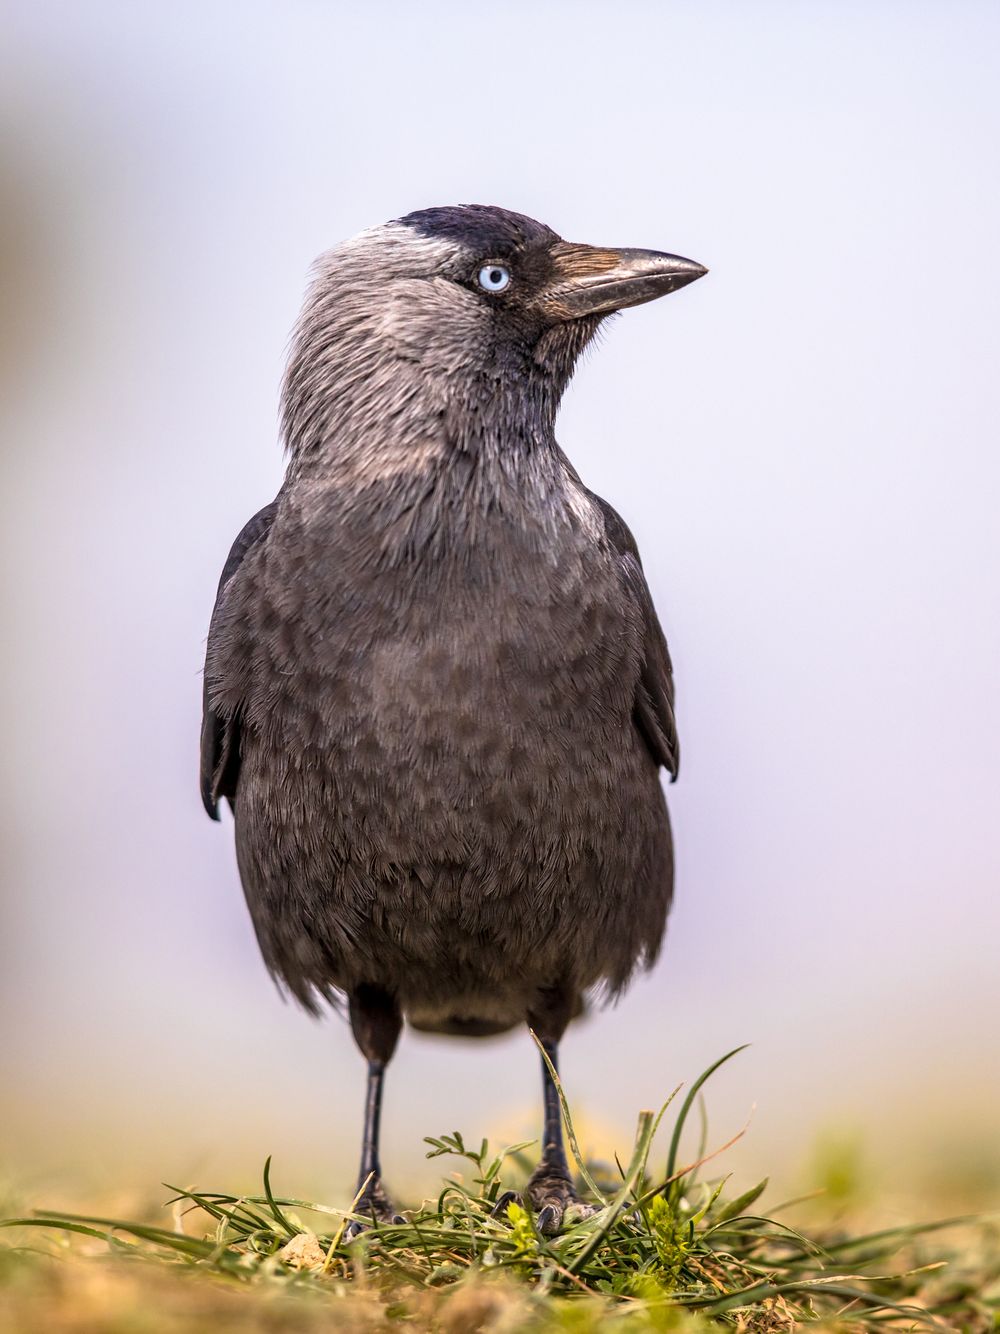 One of Many Species in the Corvid Family